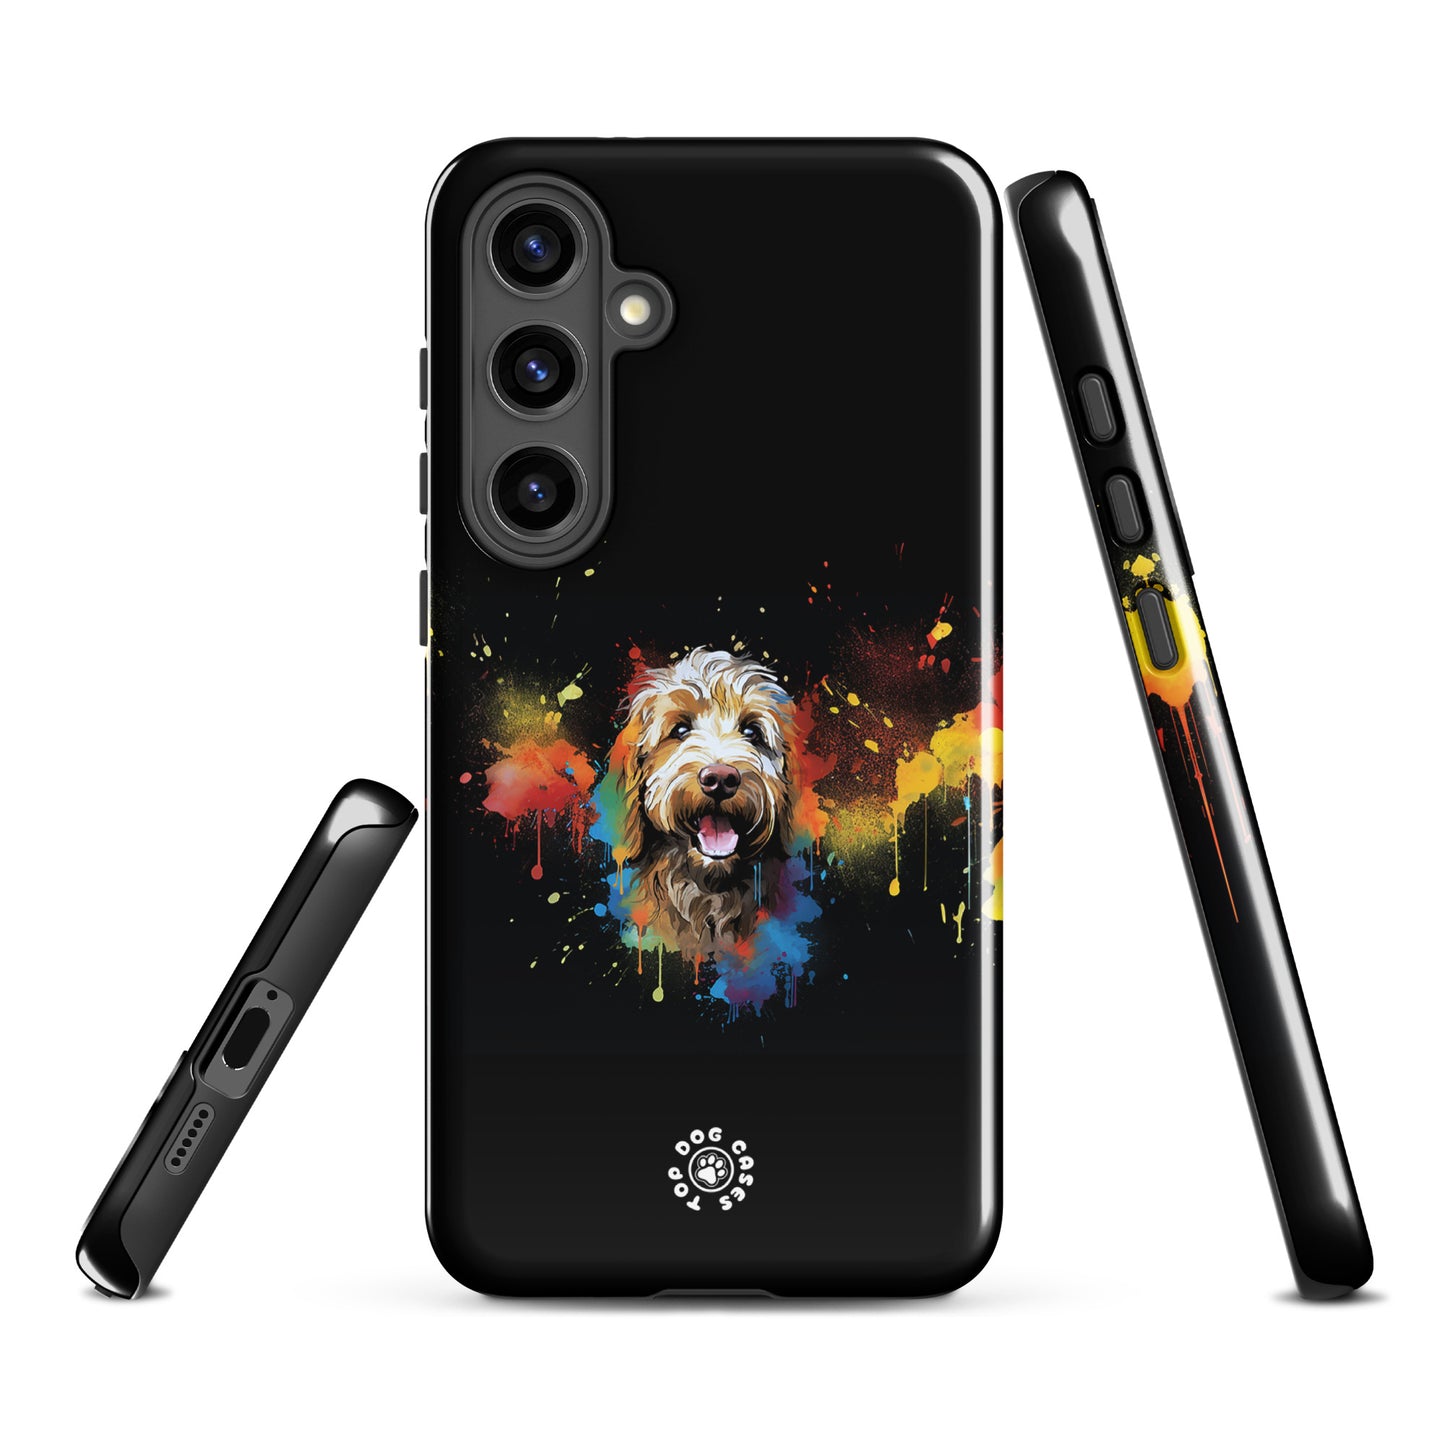 Goldendoodle - Colorful Phone Case - Samsung - Top Dog Cases - #ColorfulPhoneCases, #DogPhoneCase, #dogs, #Goldendoodle, #Samsung, #SamsungGalaxy, #SamsungGalaxyCase, #SamsungGalaxyS10, #SamsungGalaxyS20, #SamsungGalaxyS21, #SamsungGalaxyS22, #SamsungGalaxyS22Ultra, #SamsungGalaxyS23, #SamsungGalaxyS23Plus, #SamsungGalaxyS23Ultra, #SamsungPhoneCase, SamsungGalaxyS20Plus, SamsungGalaxyS22Plus